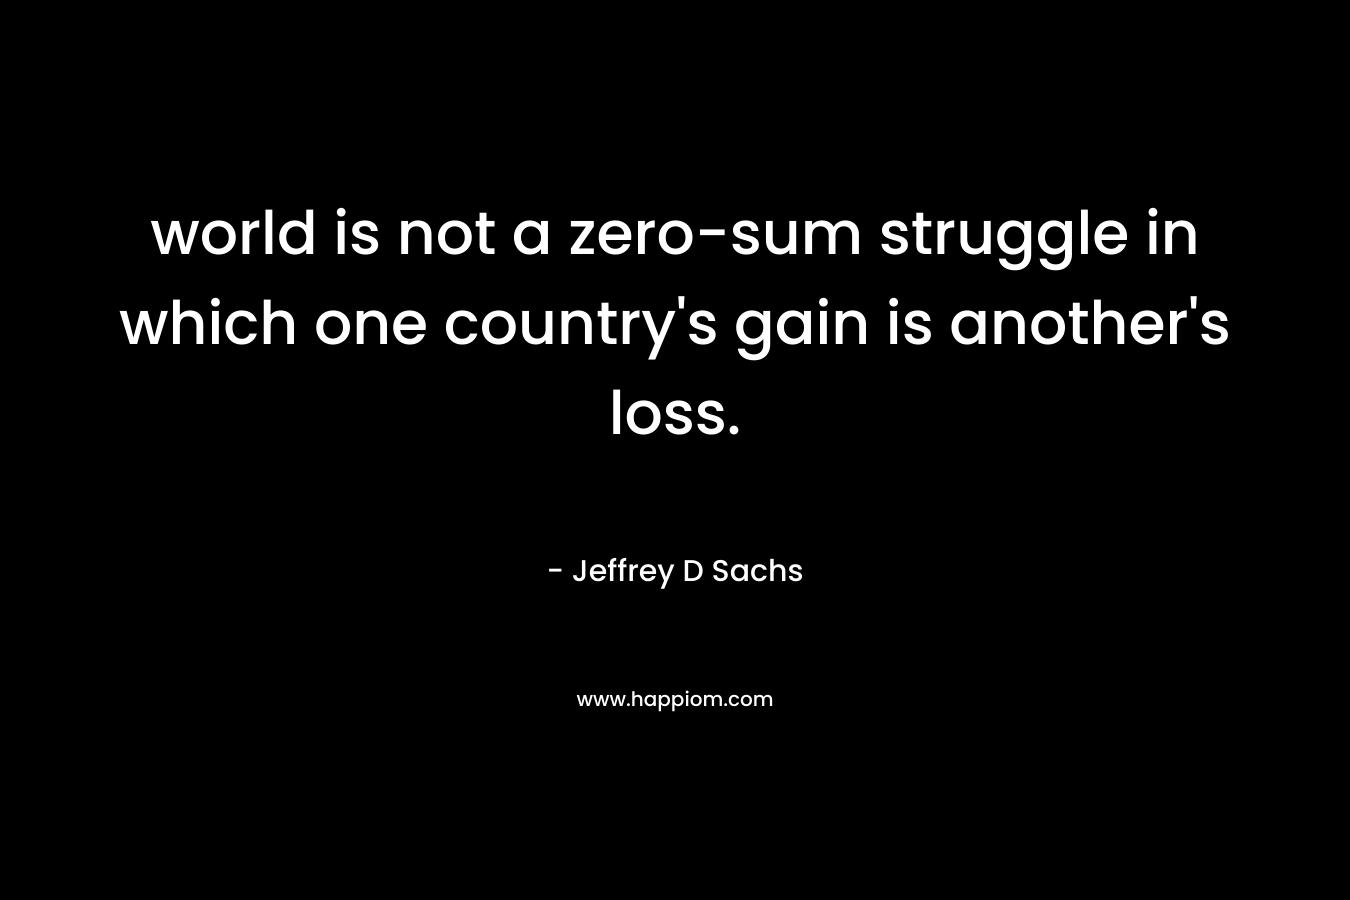 world is not a zero-sum struggle in which one country’s gain is another’s loss. – Jeffrey D Sachs